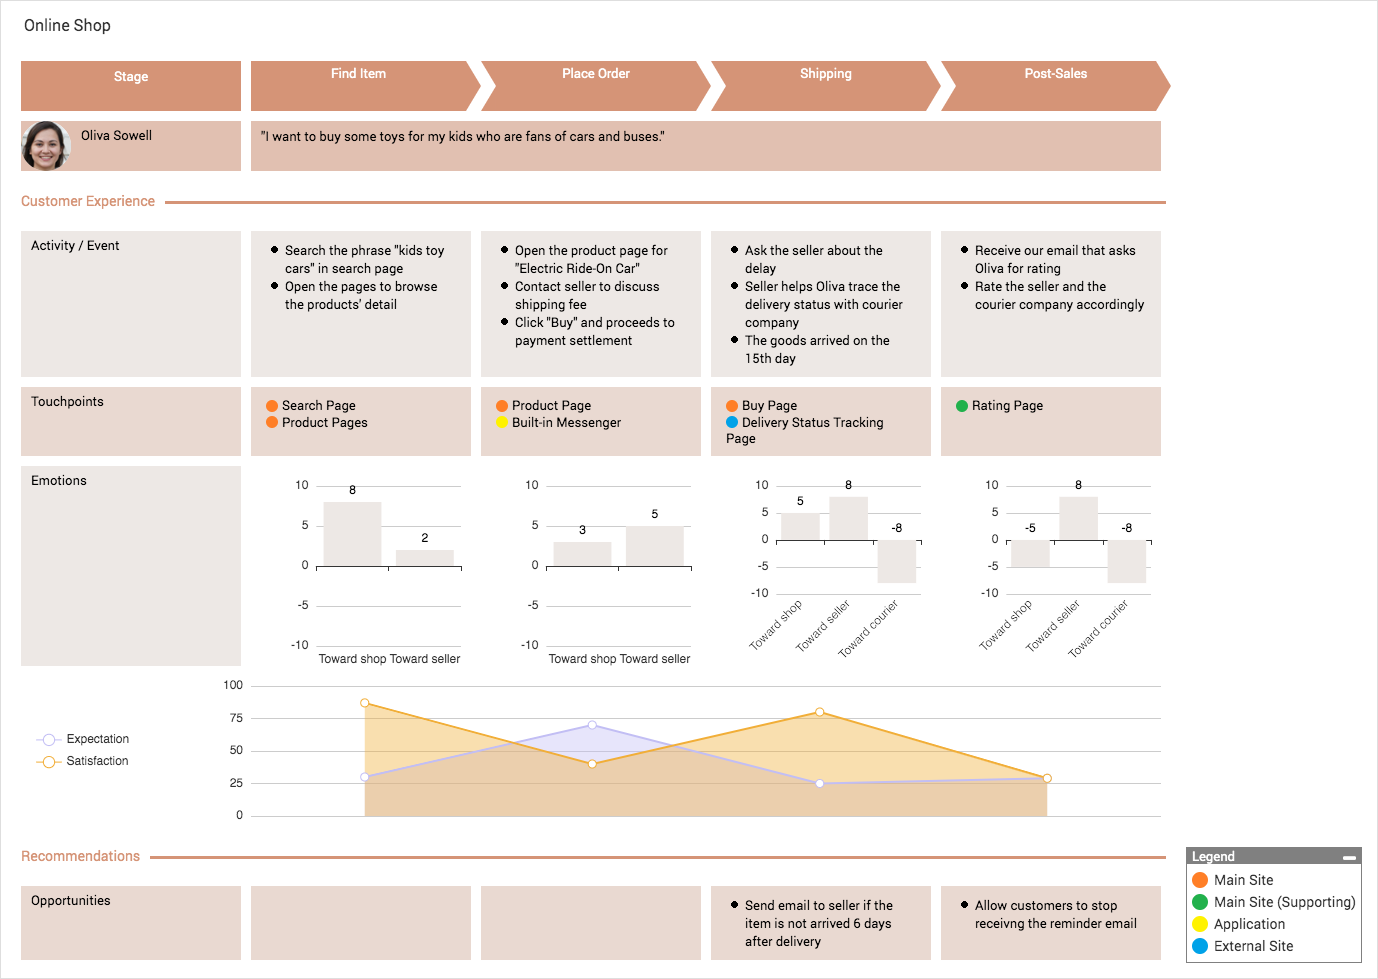 Customer Journey Mapping template: Online Shop (Created by Diagrams's Customer Journey Mapping maker)